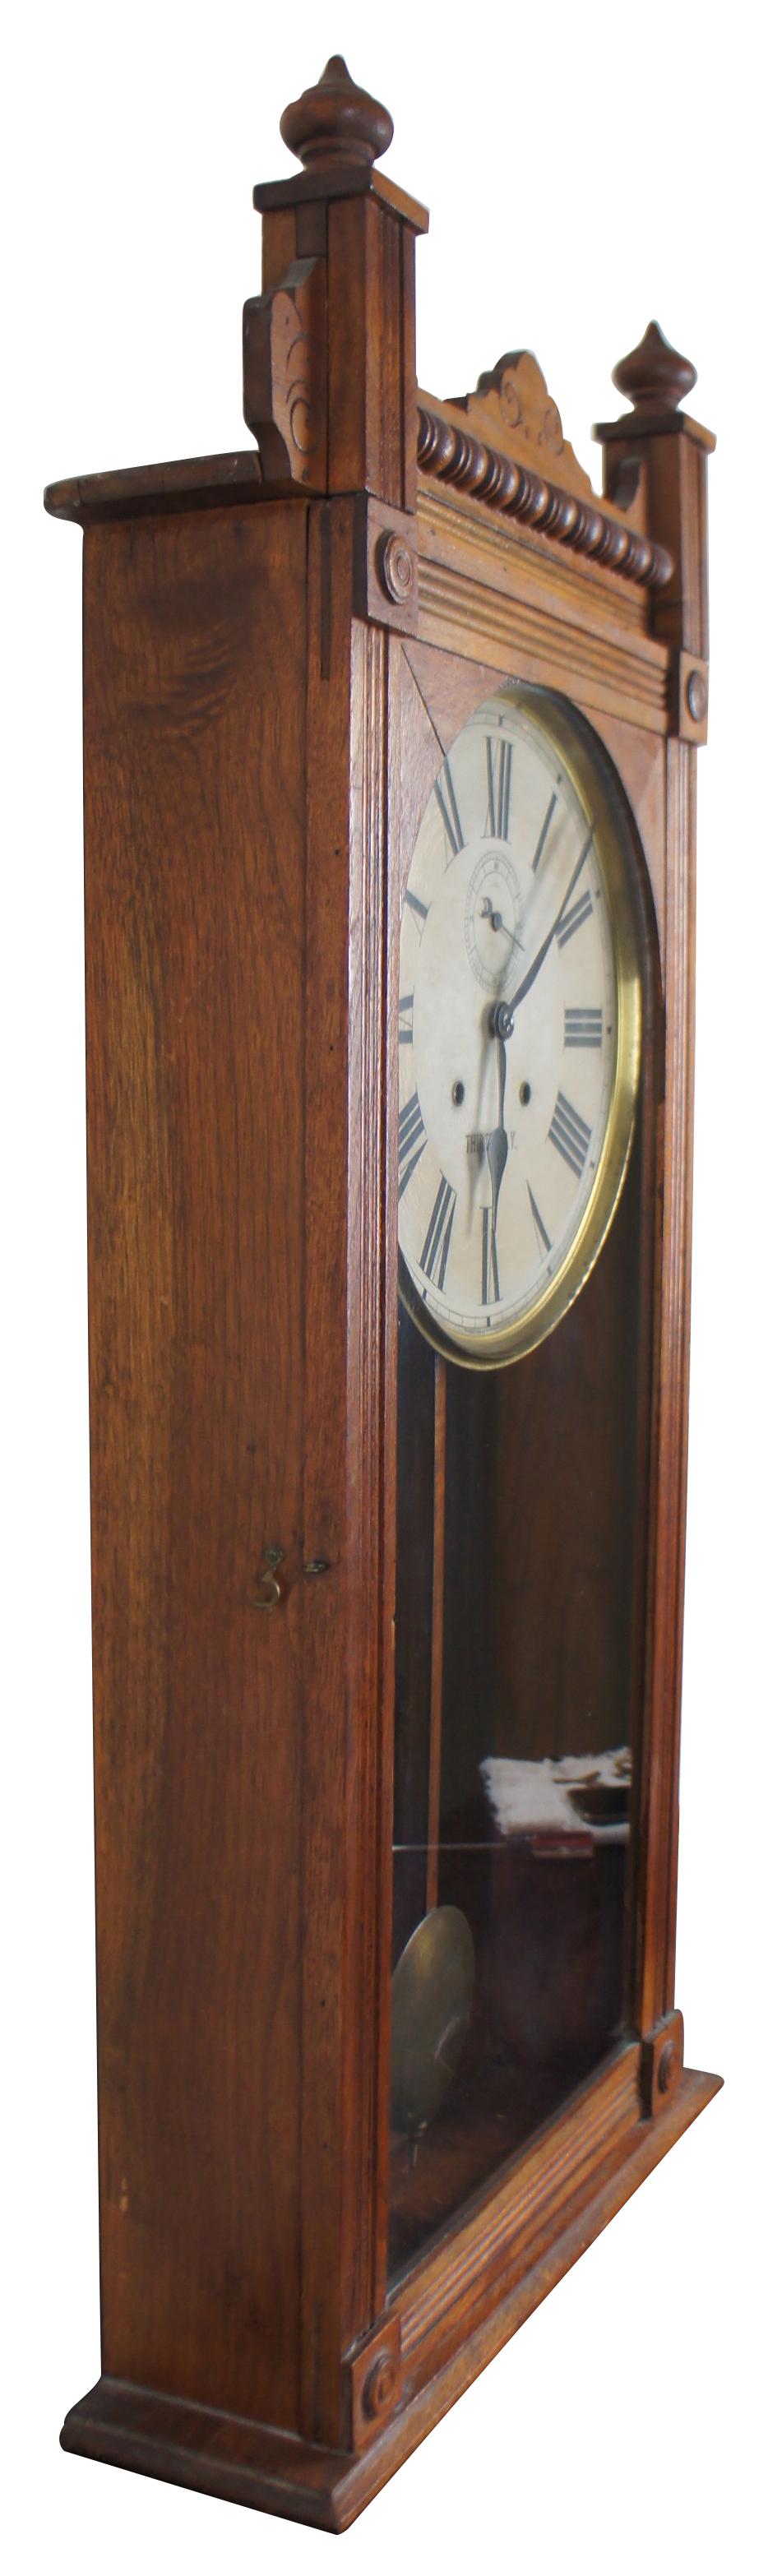 Antique Waterbury Clock Co. Cambridge Thirty Day Model Clock, circa 1890s.  Features a long walnut case with Eastlake carvings.  A double wind face that times with second hand.  No.607
